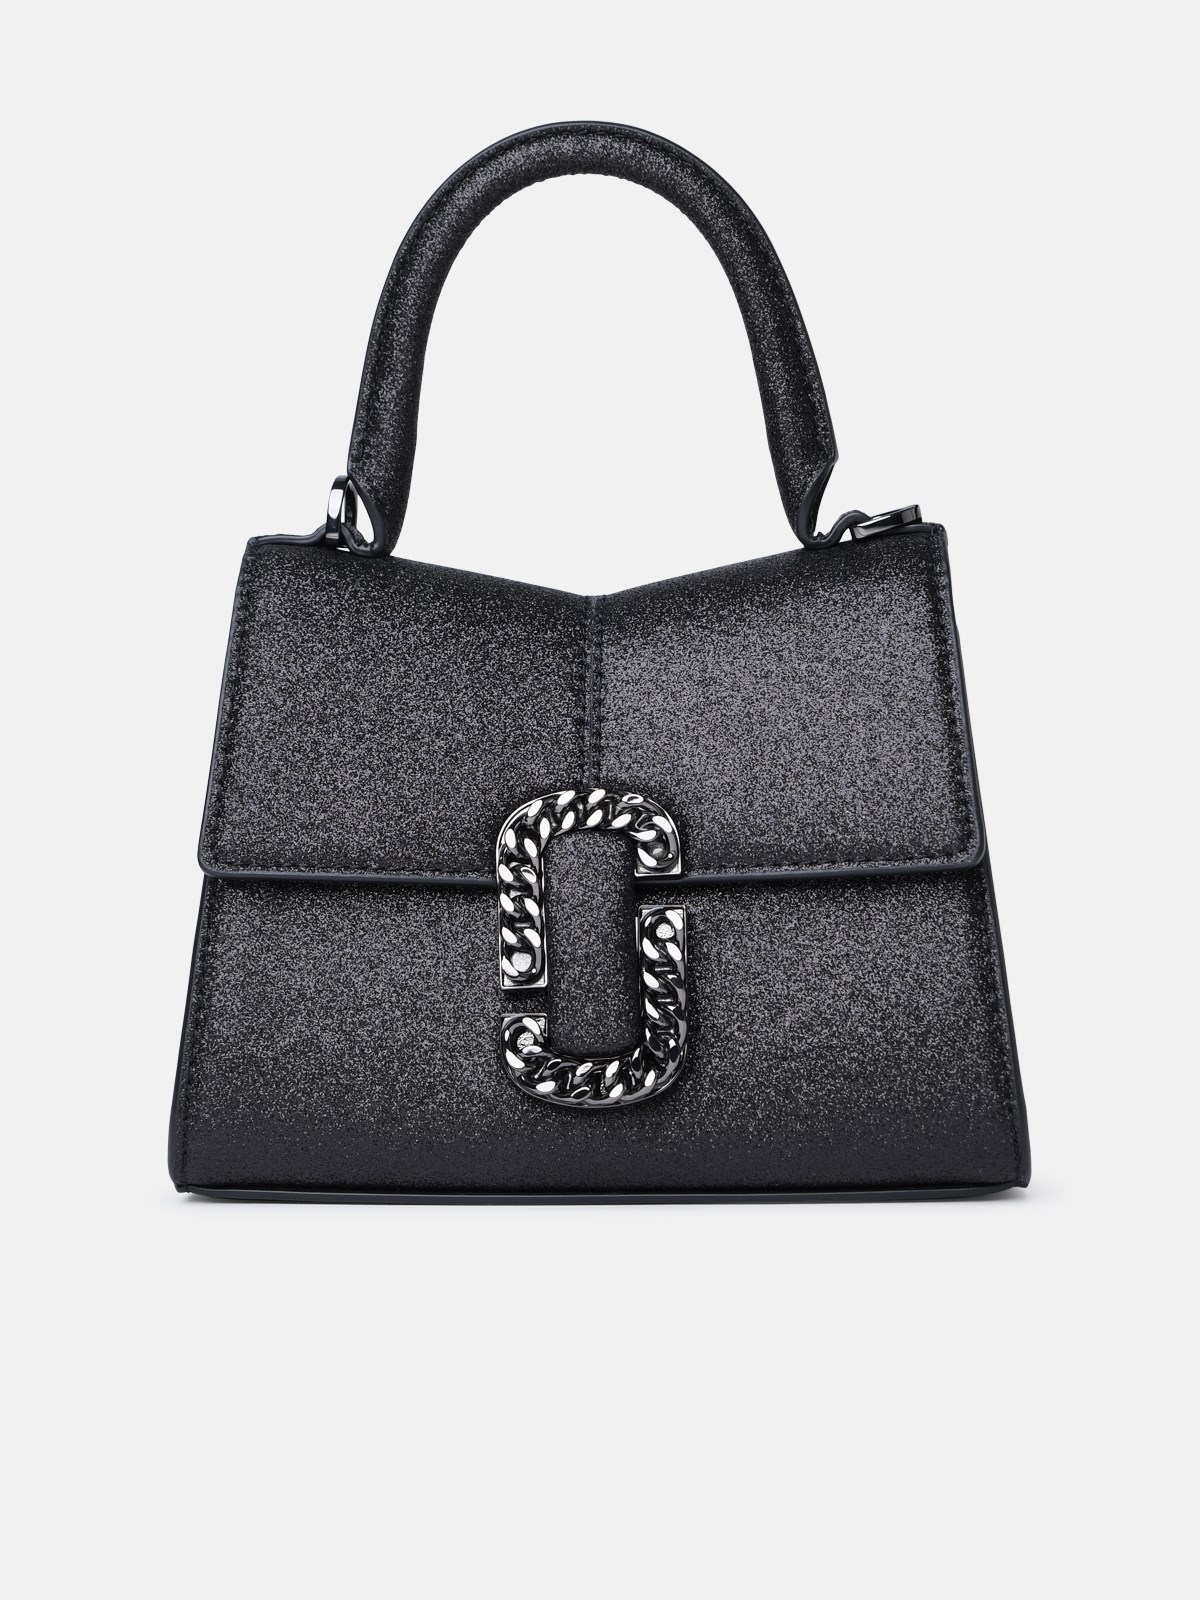 Marc Jacobs (the) 'st. Marc' Black Glitter Leather Bag